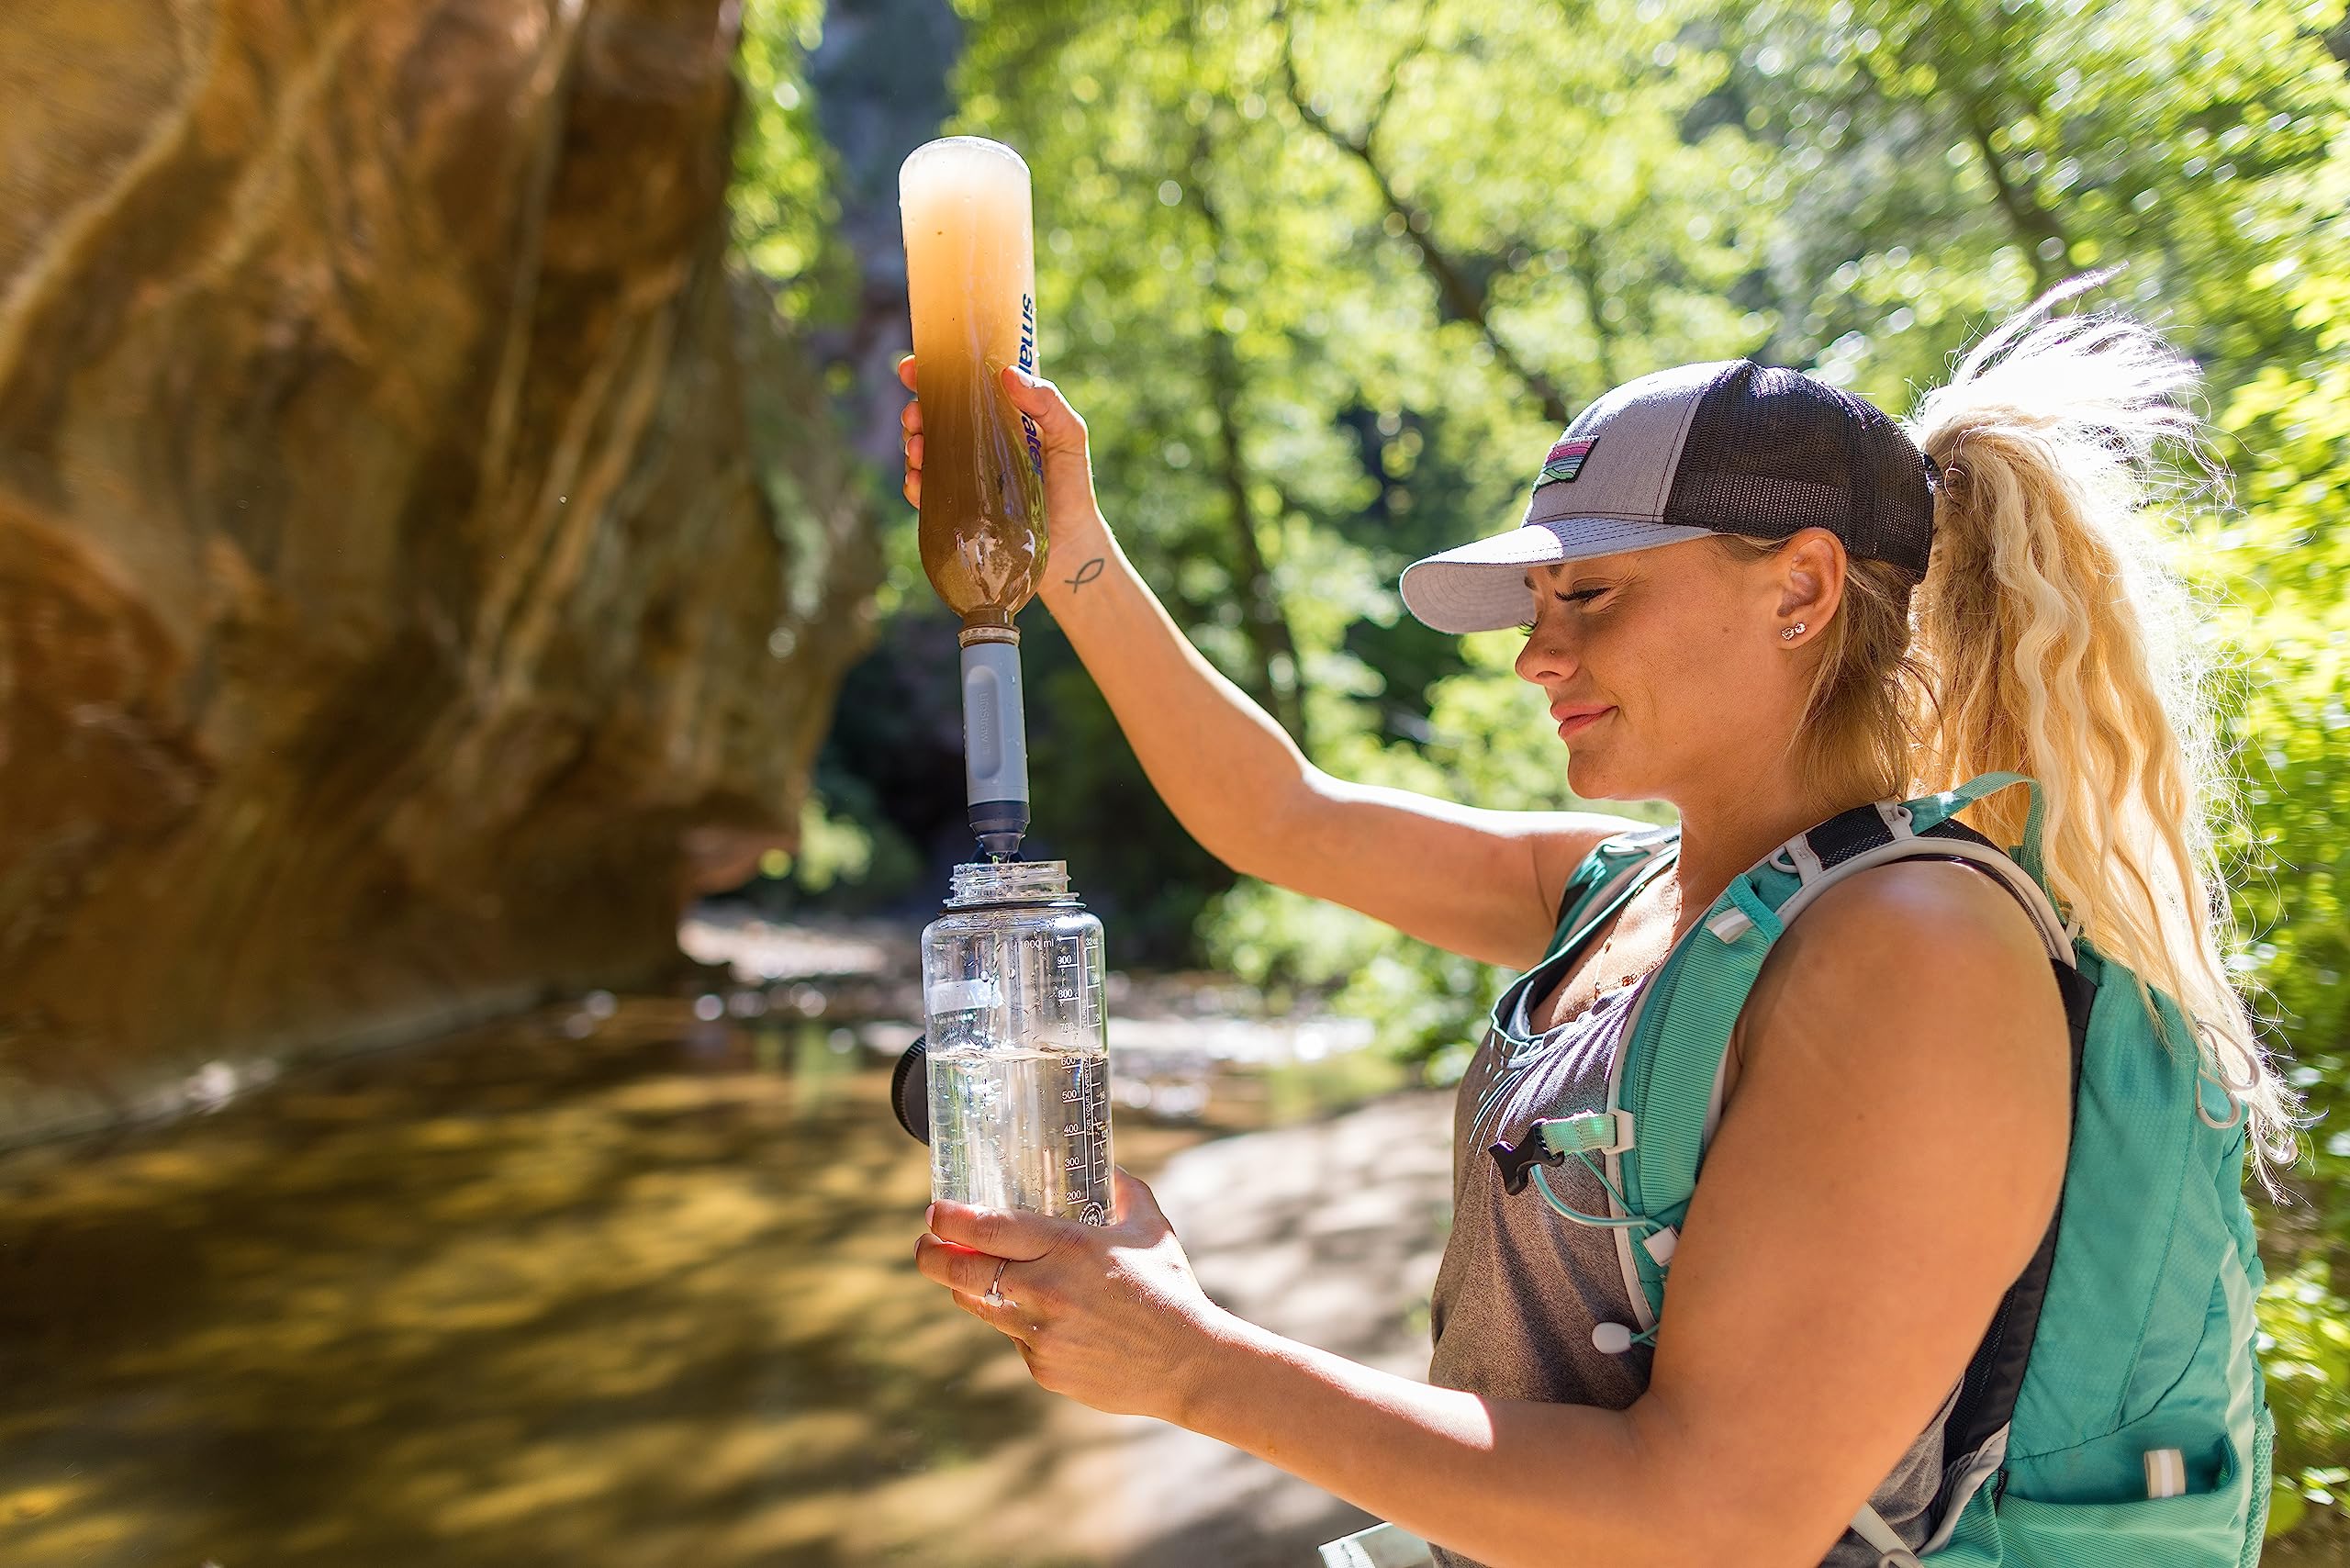 LifeStraw Peak Series – Solo Personal Water Filter for Hiking, Camping, Travel, Survival and Emergency preparedness. Removes Bacteria, parasites and microplastics.